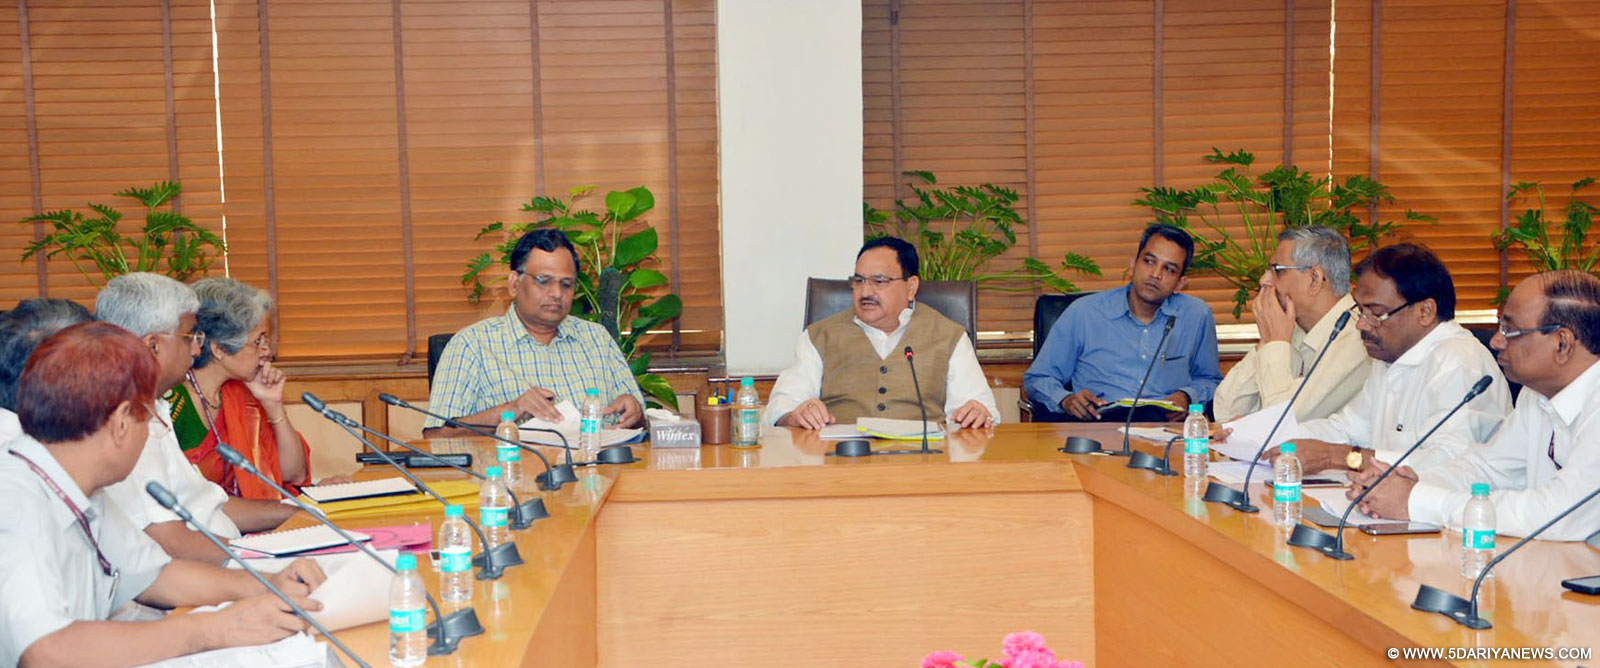 The Union Minister for Health & Family Welfare, Shri J.P. Nadda chairing the review meeting on Swine Flu Preparedness, in New Delhi on Tuesday, October 13, 2015. The Secretary, Ministry of Health and Family Welfare, Shri B.P. Sharma and other senior officers of the Health Ministry are also seen.